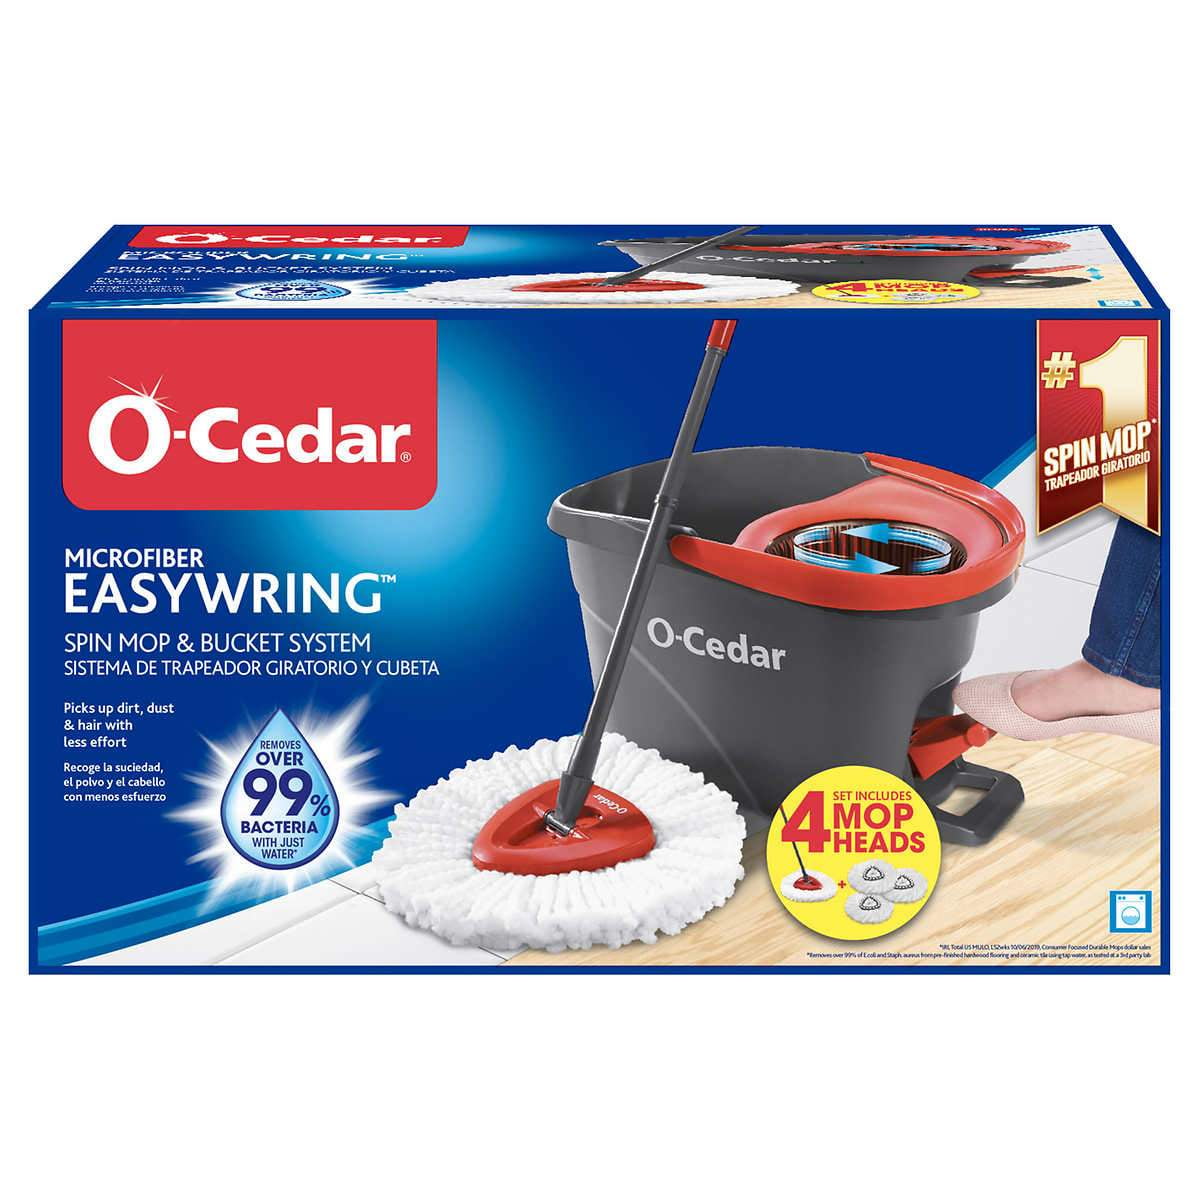 O-Cedar Easy Wring Spin Mop & Bucket System with 3 Extra Refills..Free Shipping! 